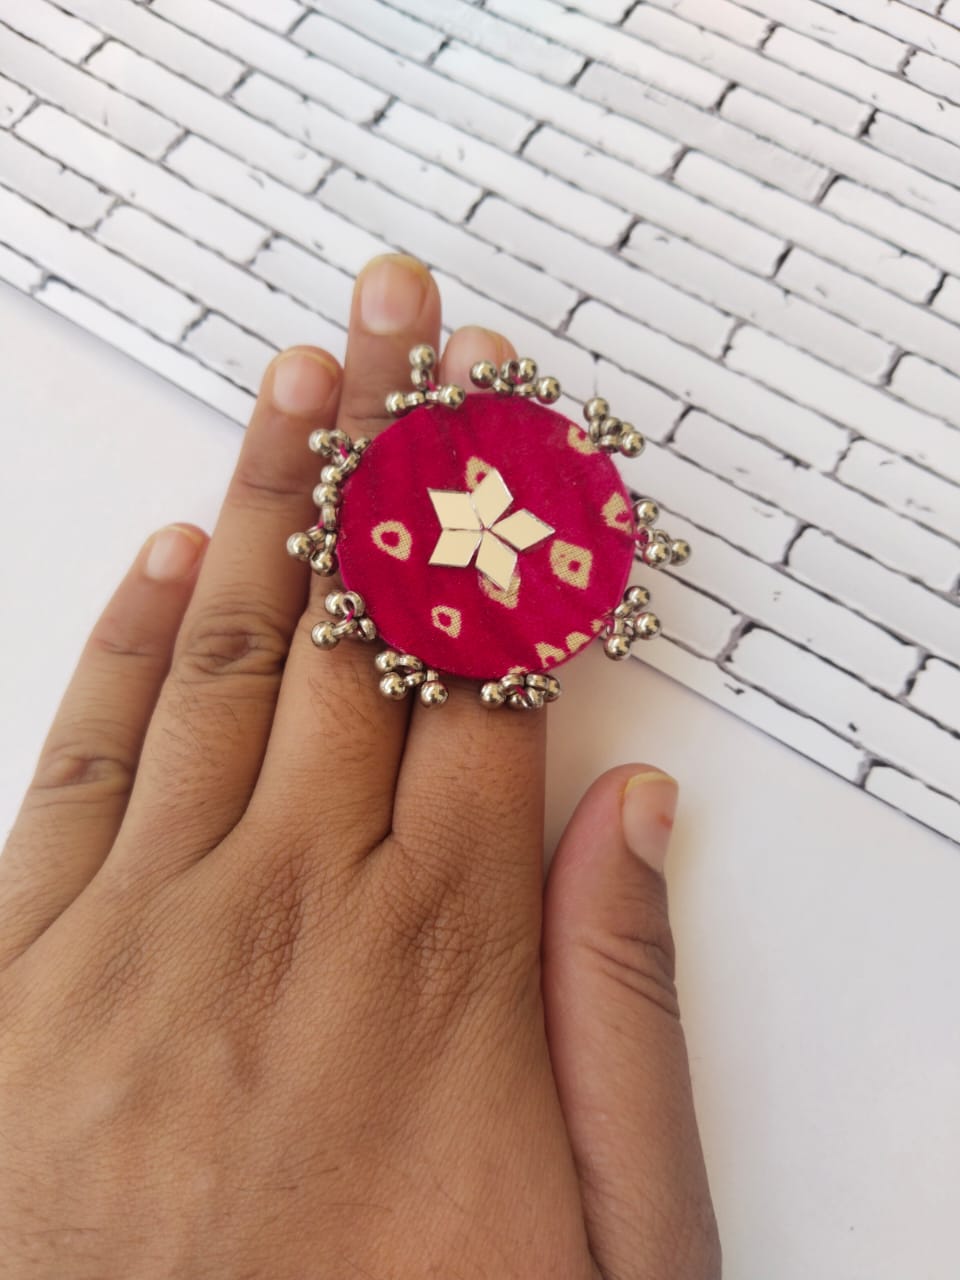 Hand wearing round red bandhani print finger ring with mirrors and ghungroo on white backdrop